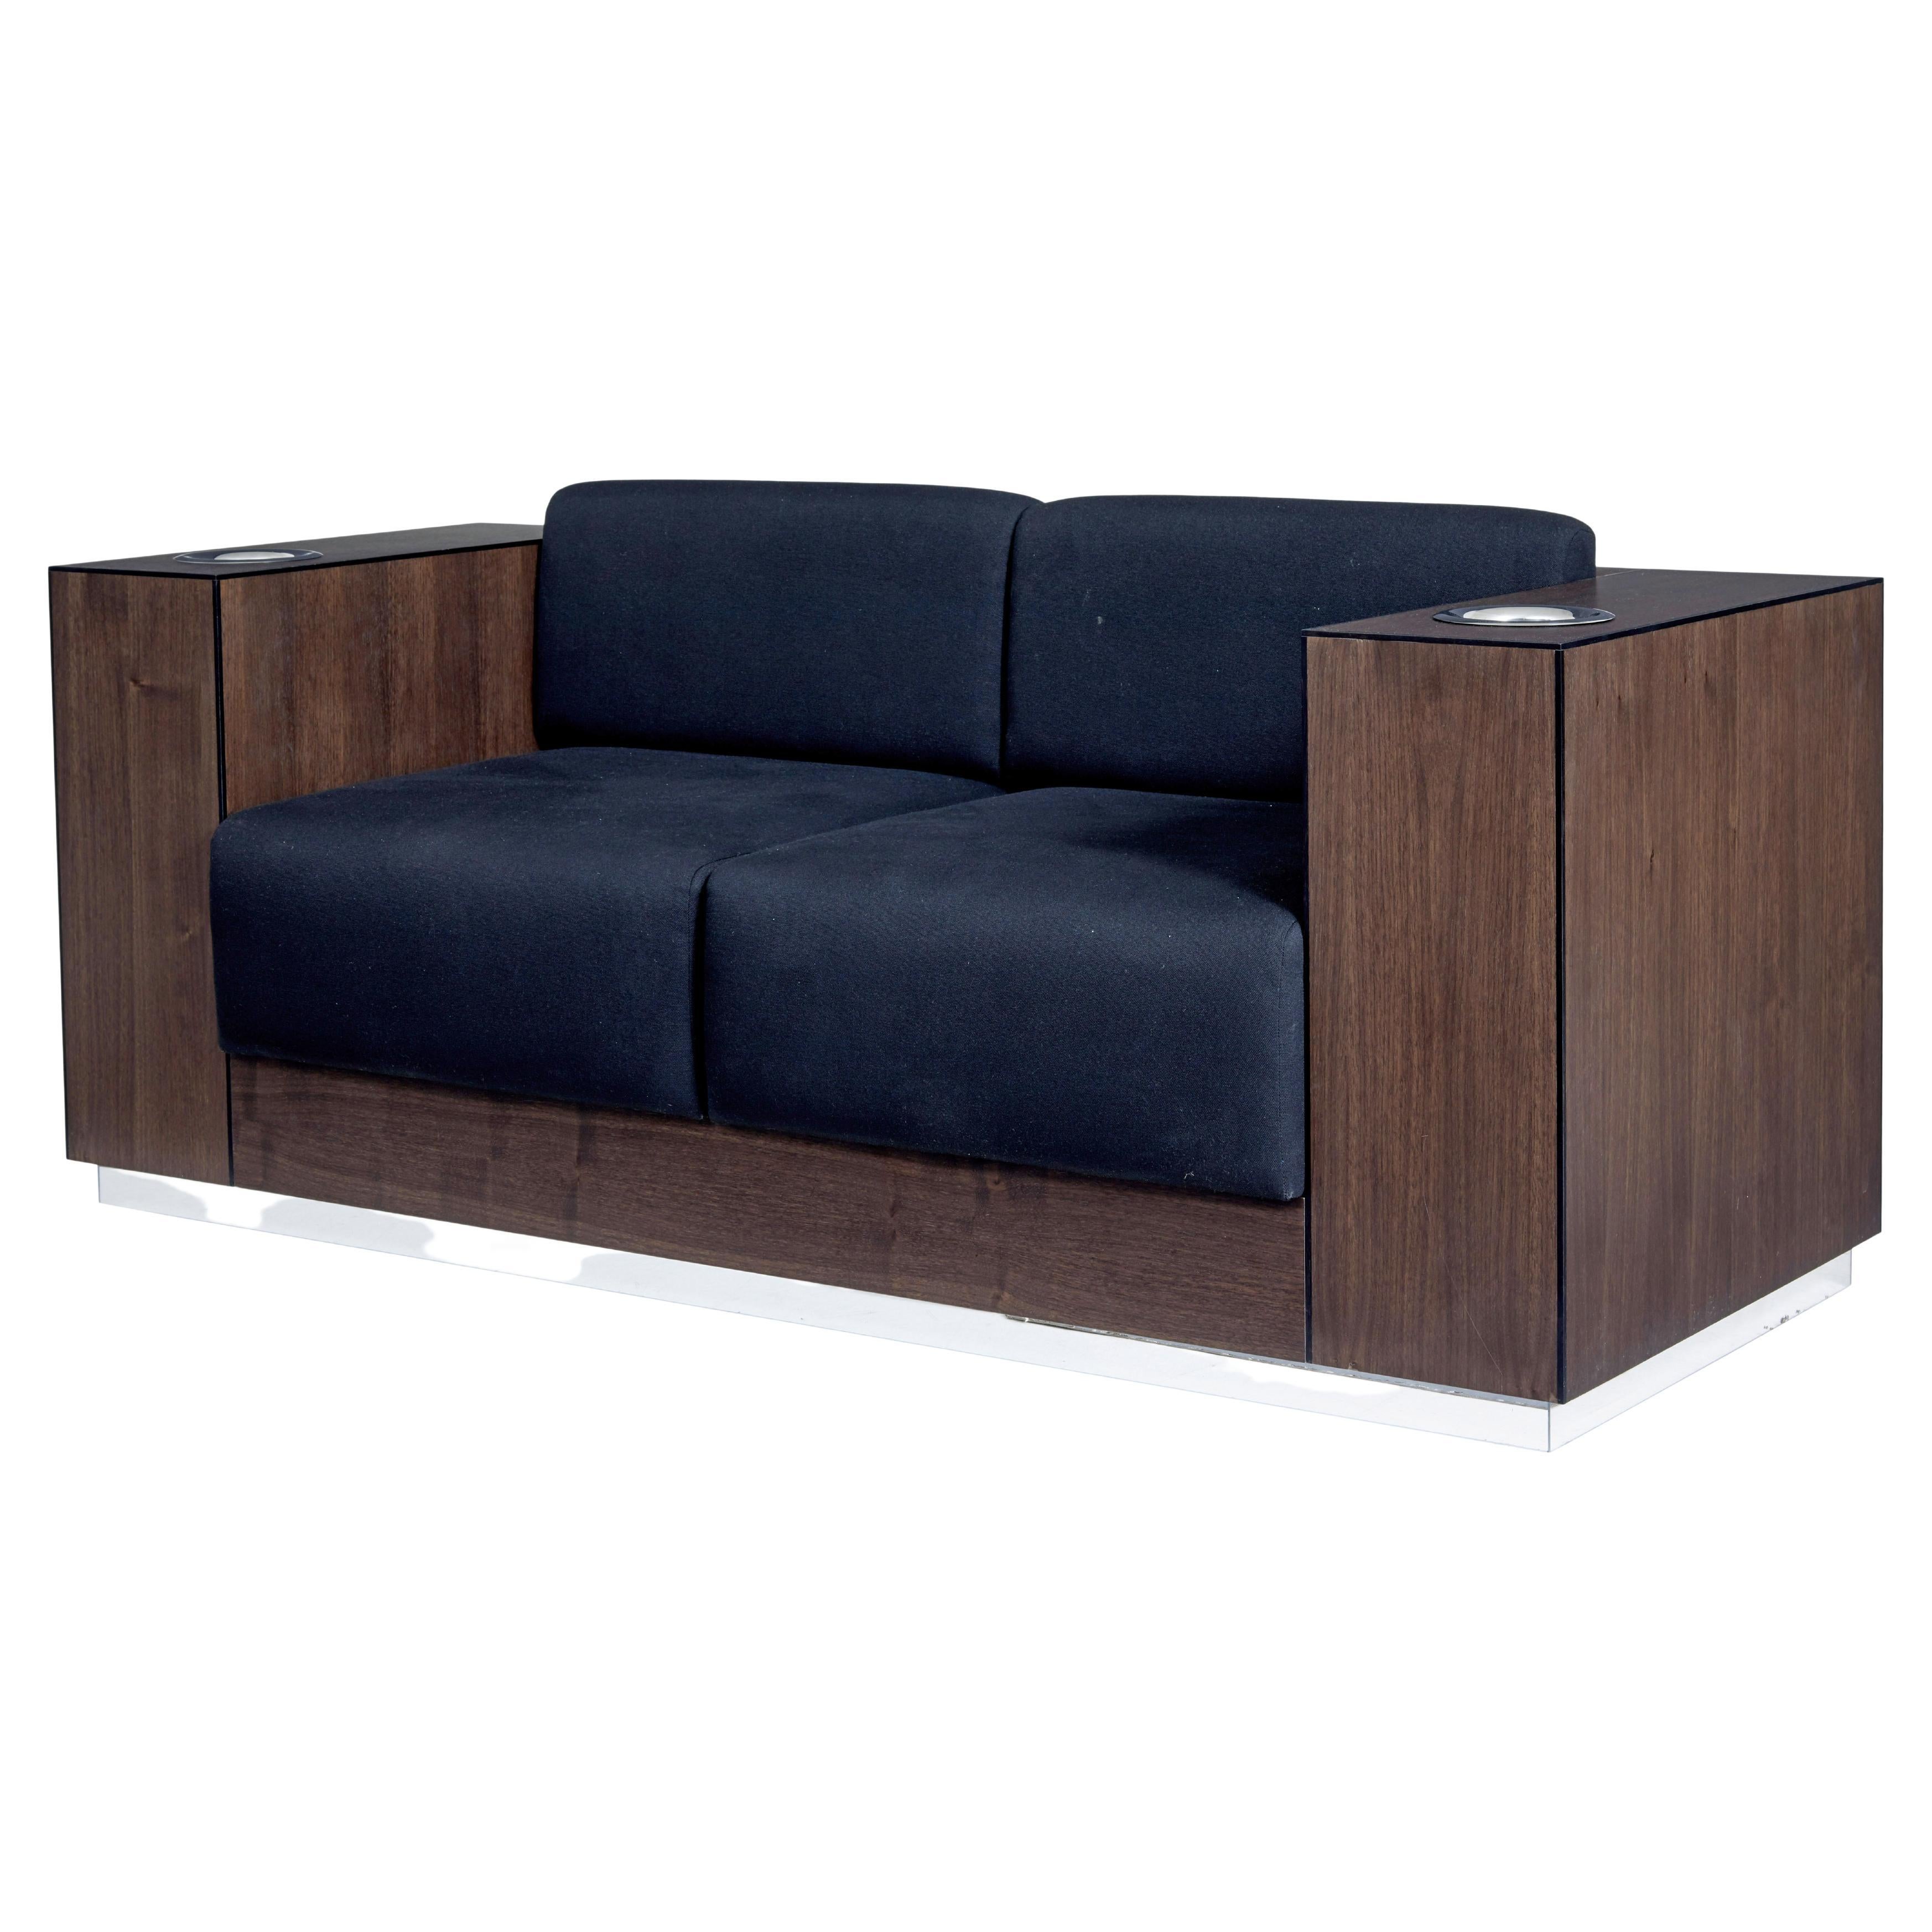 Modern walnut sofa fitted with kaelo wine coolers